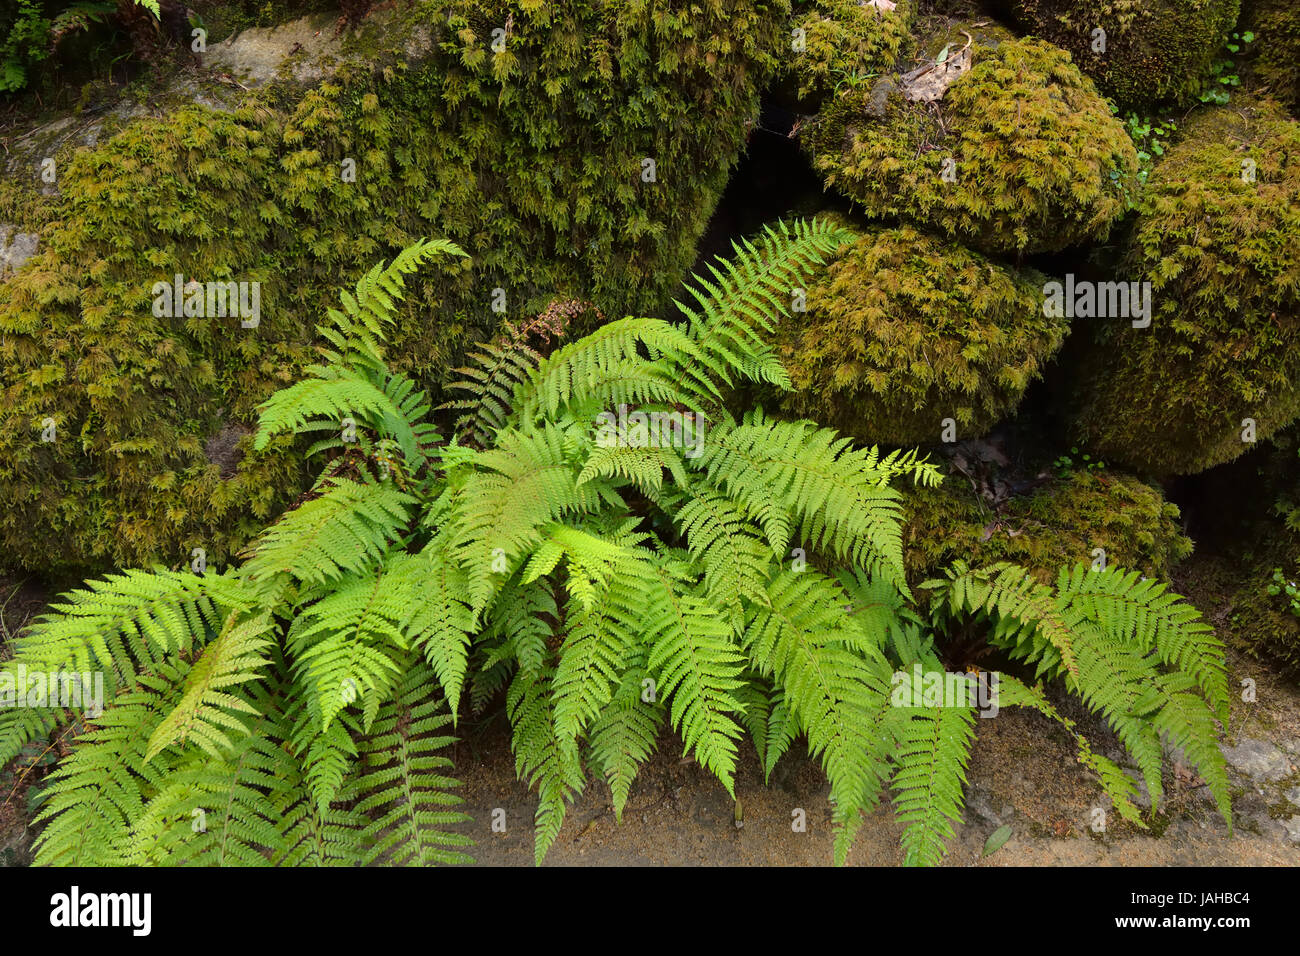 Ferns in the Condessa d'Edla Gardens, dating back to the 19th century. Sintra mountain range, a Unesco World Heritage Site. Portugal Stock Photo